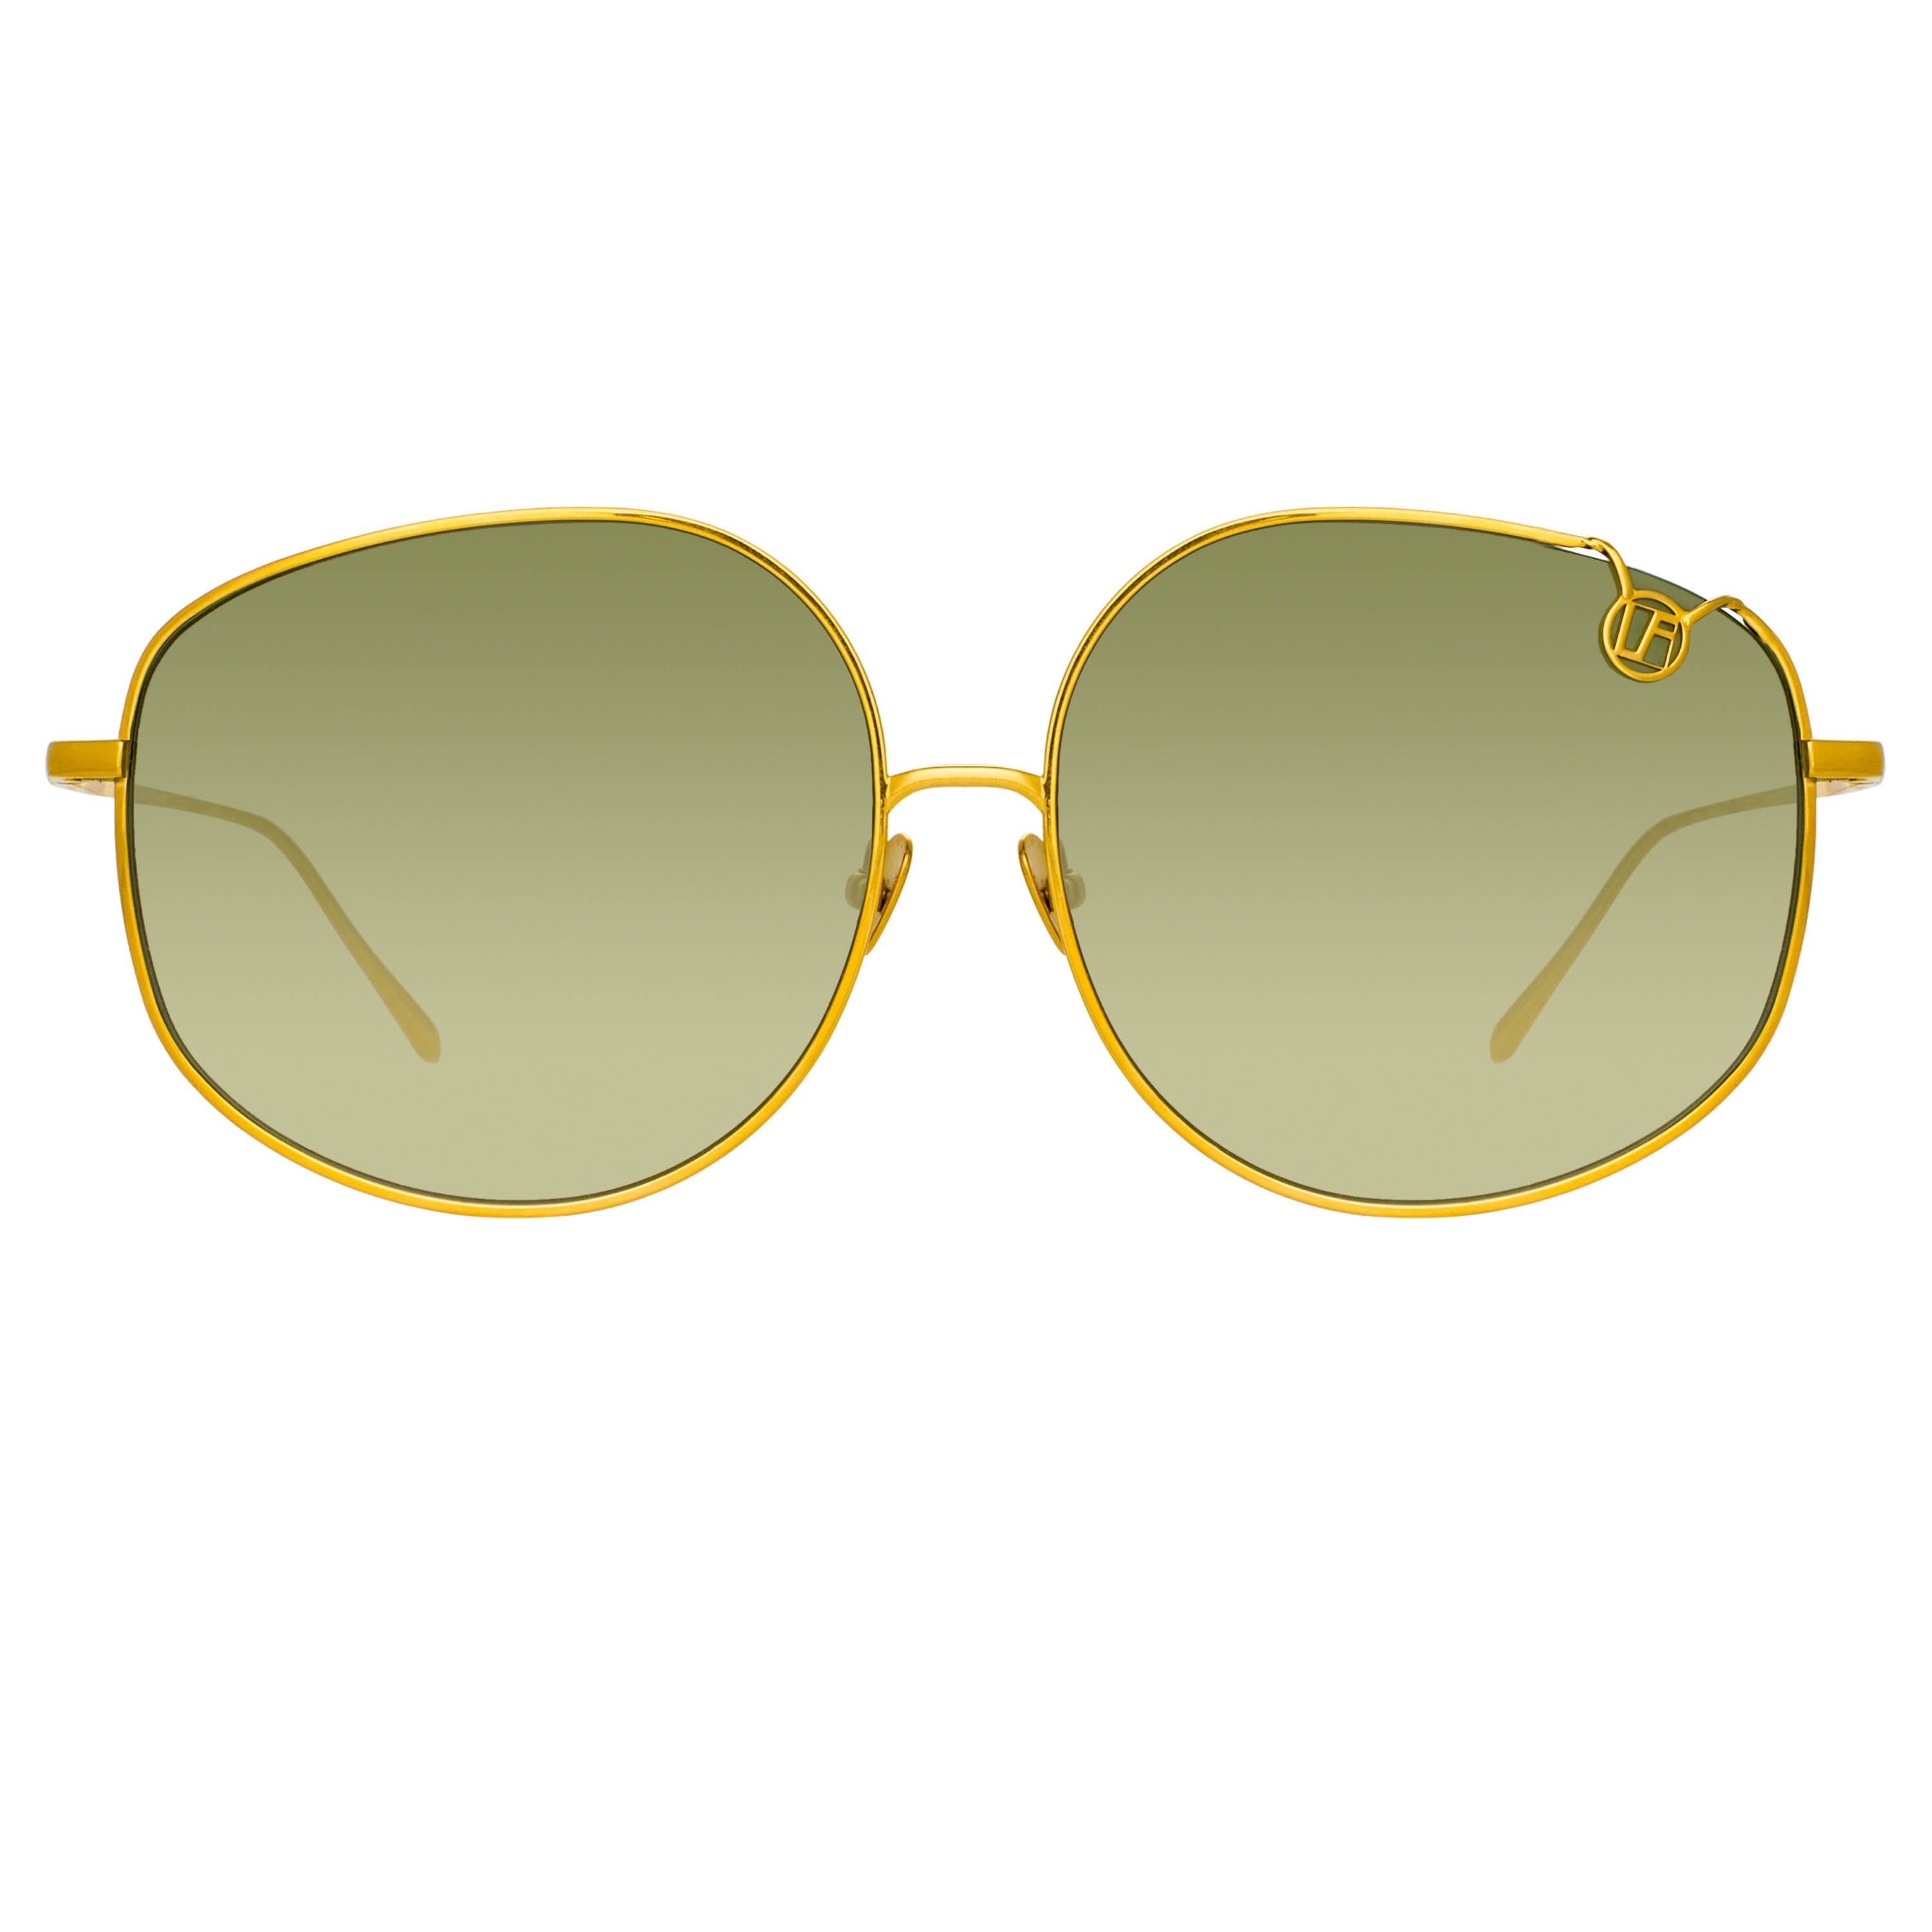 MARISA OVERSIZED SUNGLASSES IN YELLOW GOLD AND GREEN - 1